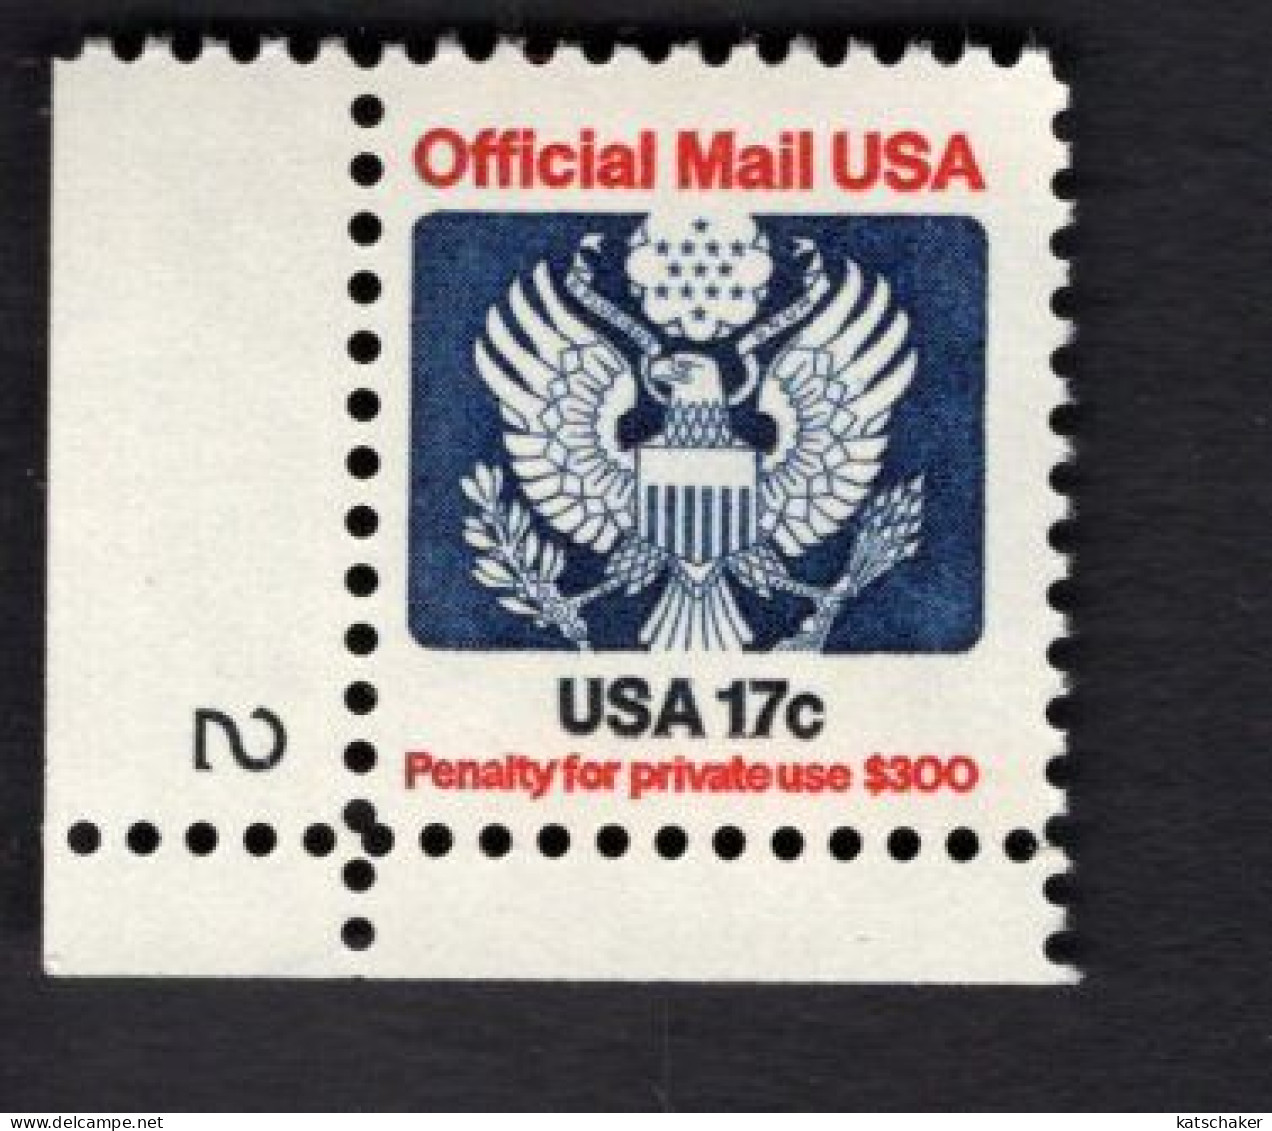 2008954892 1983 SCOTT O130 (XX)  POSTFRIS MINT NEVER HINGED - EAGLE AND SHIELD OFFICIAL MAIL - PLATE NUMBER 2 - Service